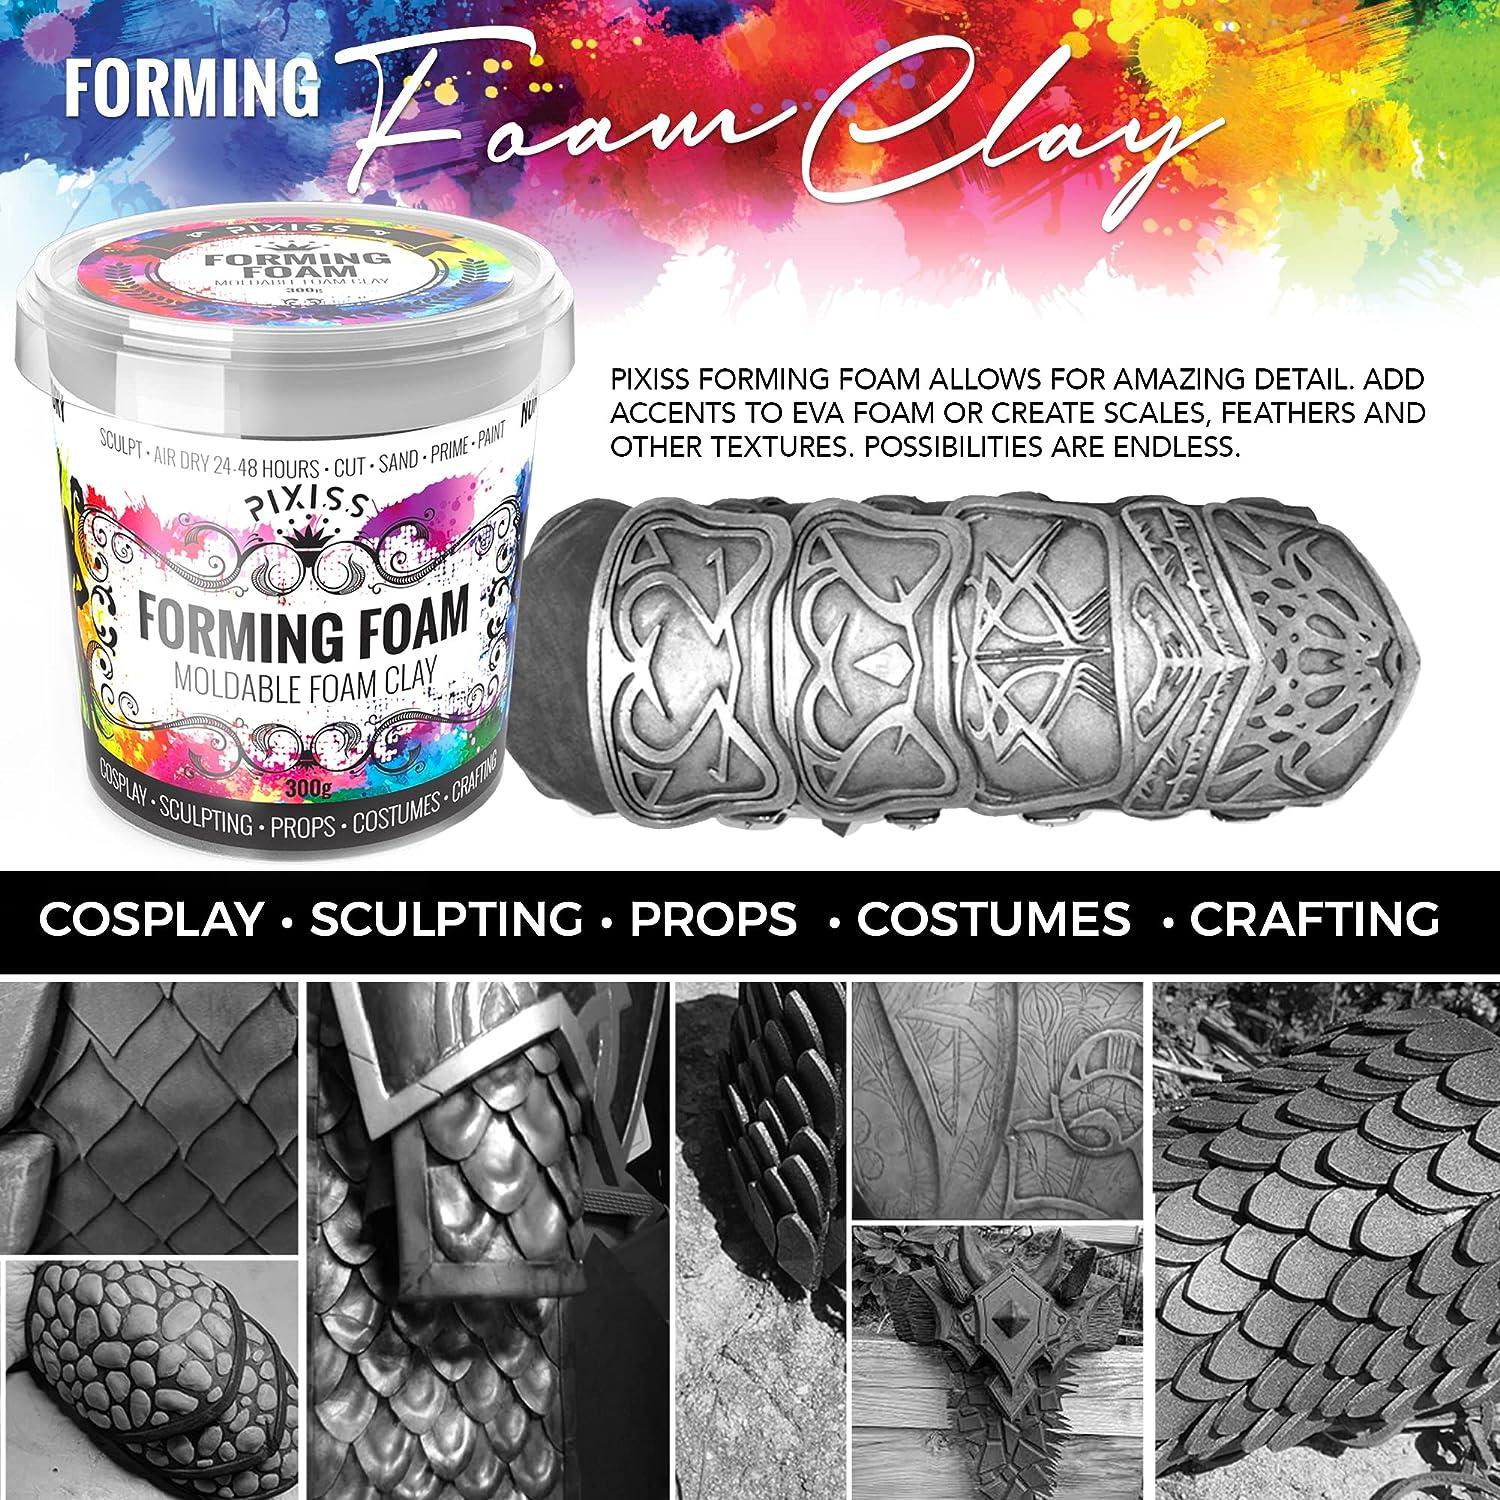 Foam Clay Air Dry Modeling Clay - Moldable Cosplay Soft Clay for